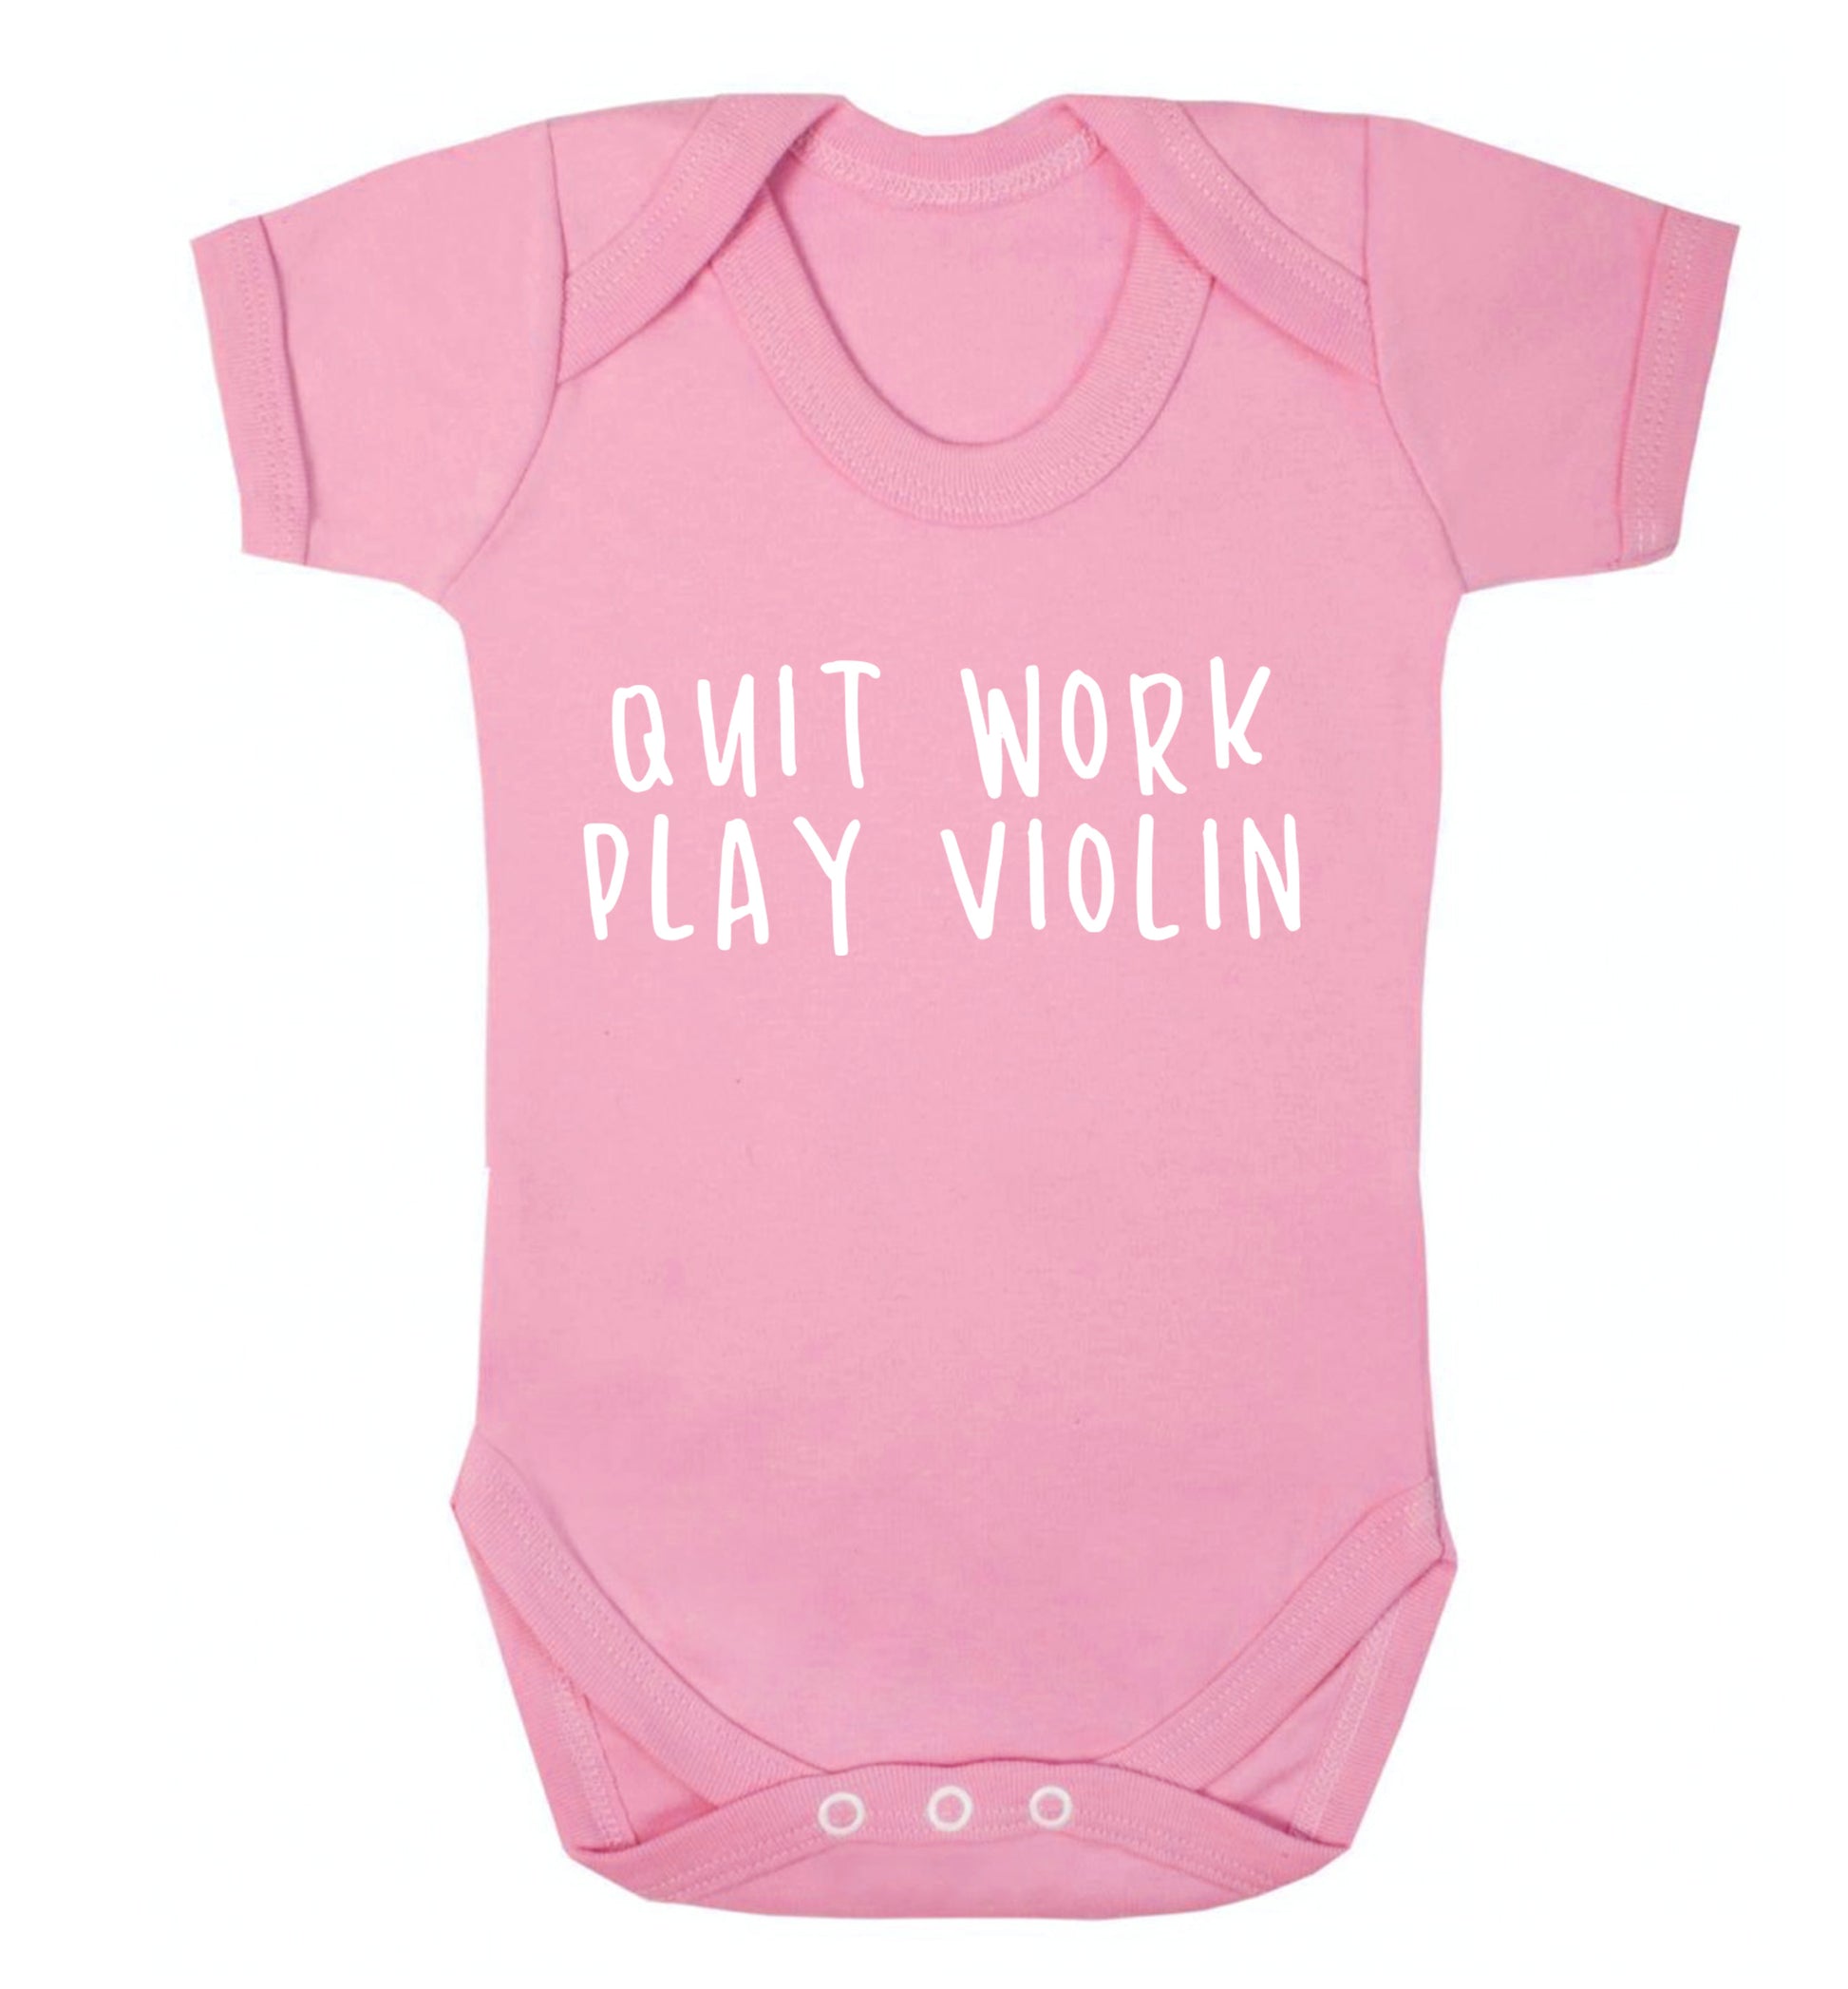 Quit work play violin Baby Vest pale pink 18-24 months